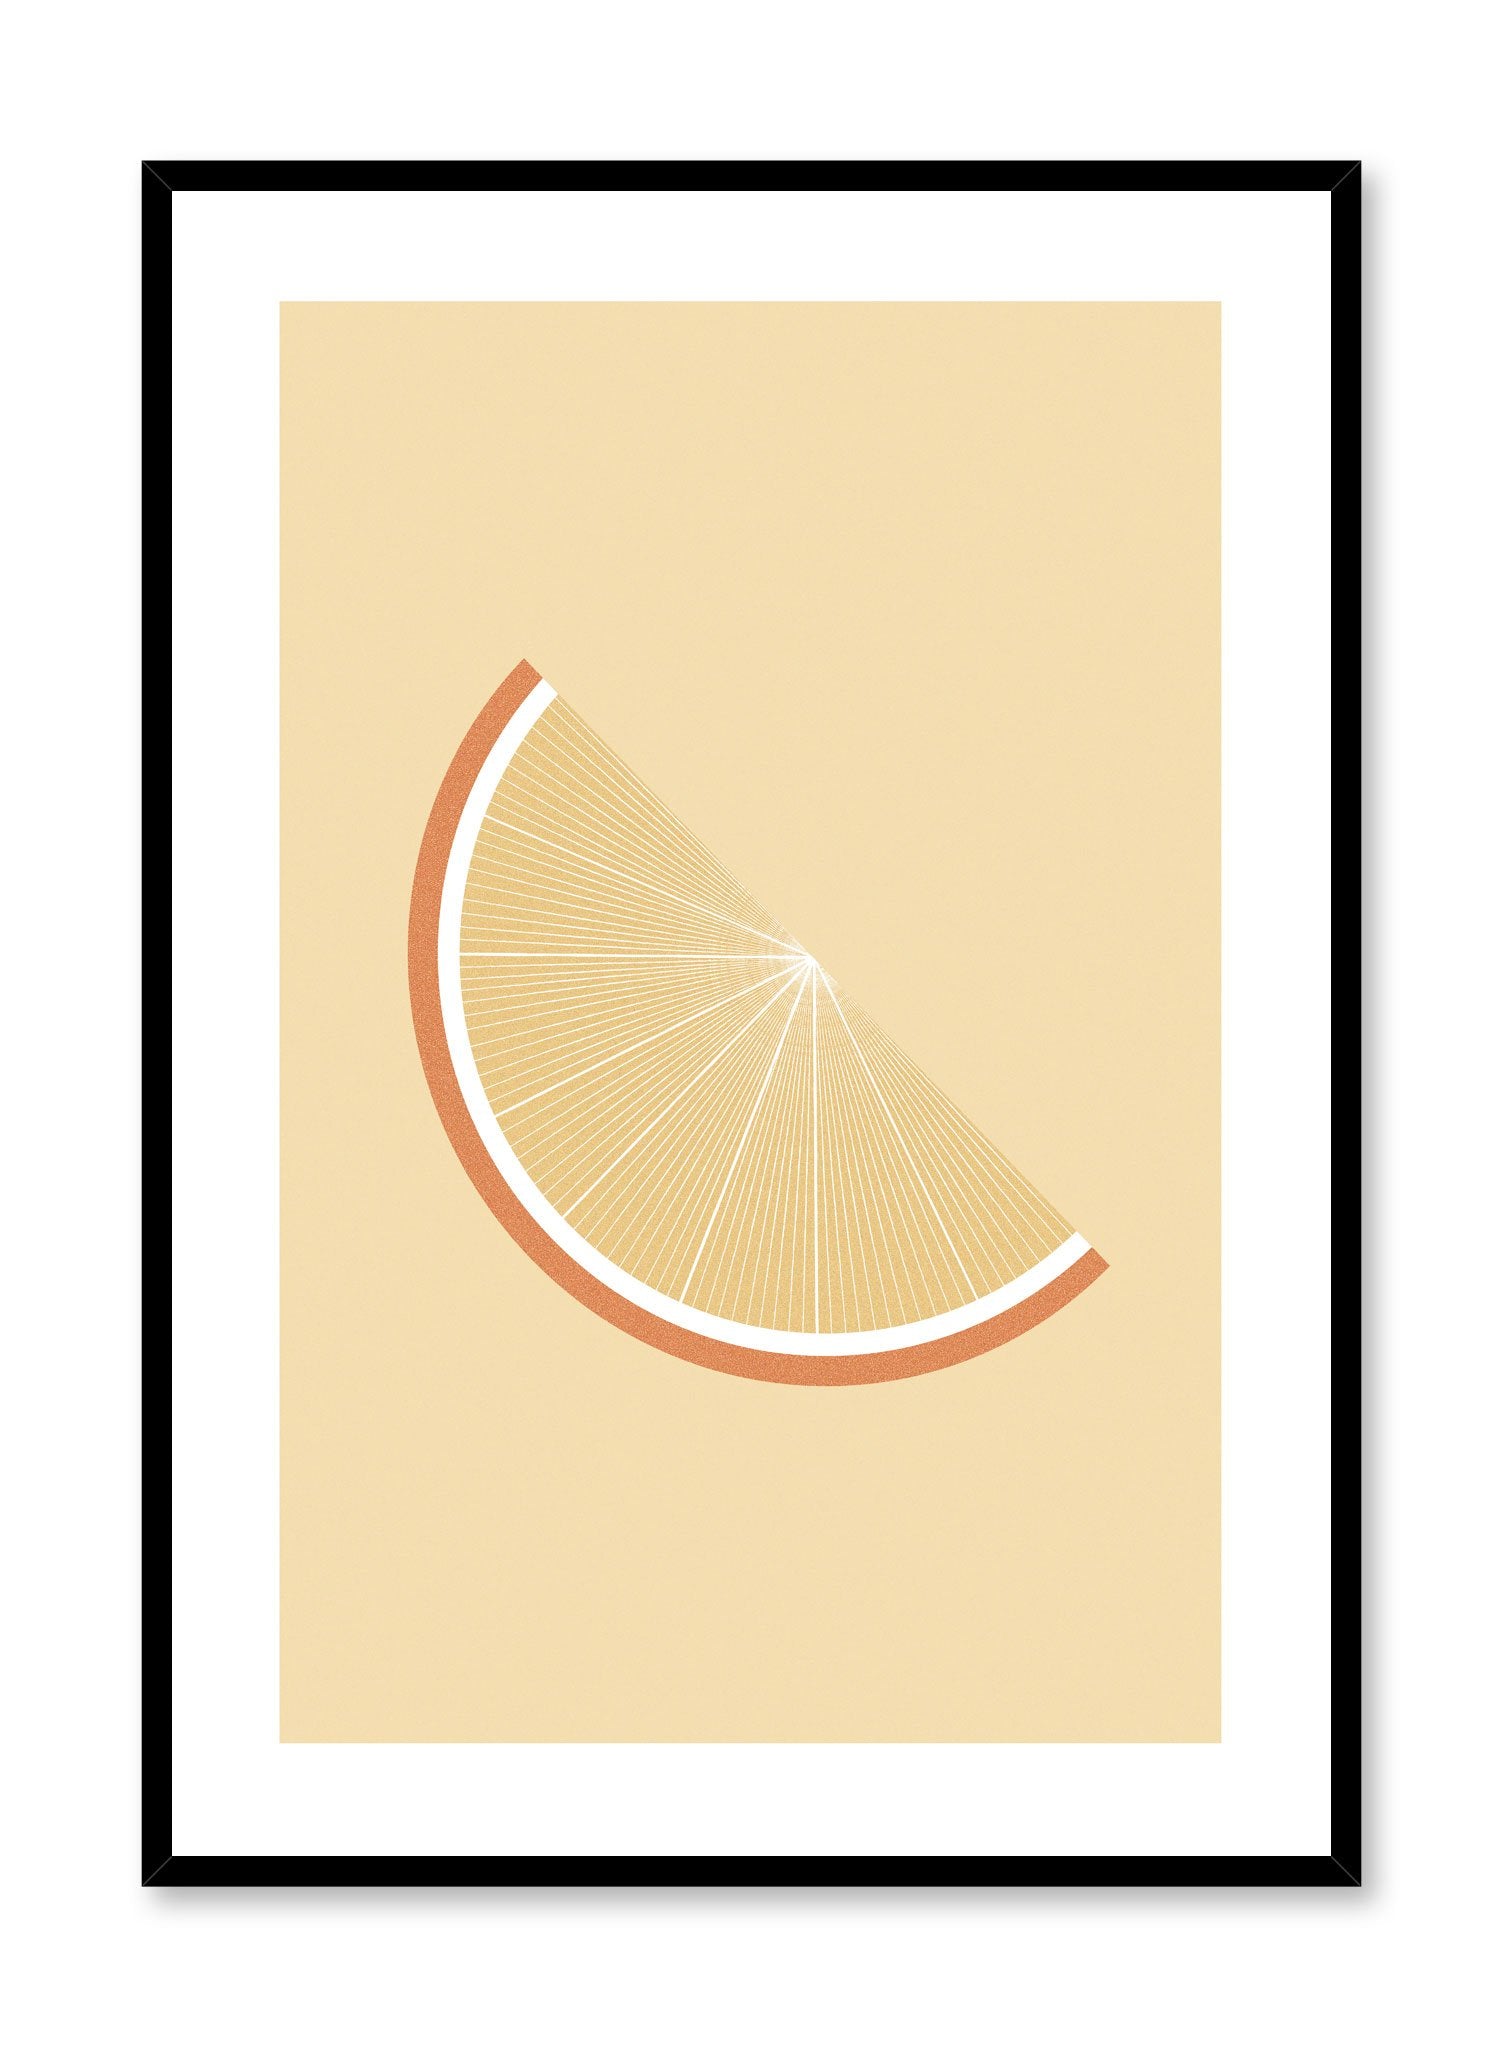 Minimalist poster by Opposite Wall with Orange Slice fruit food illustration